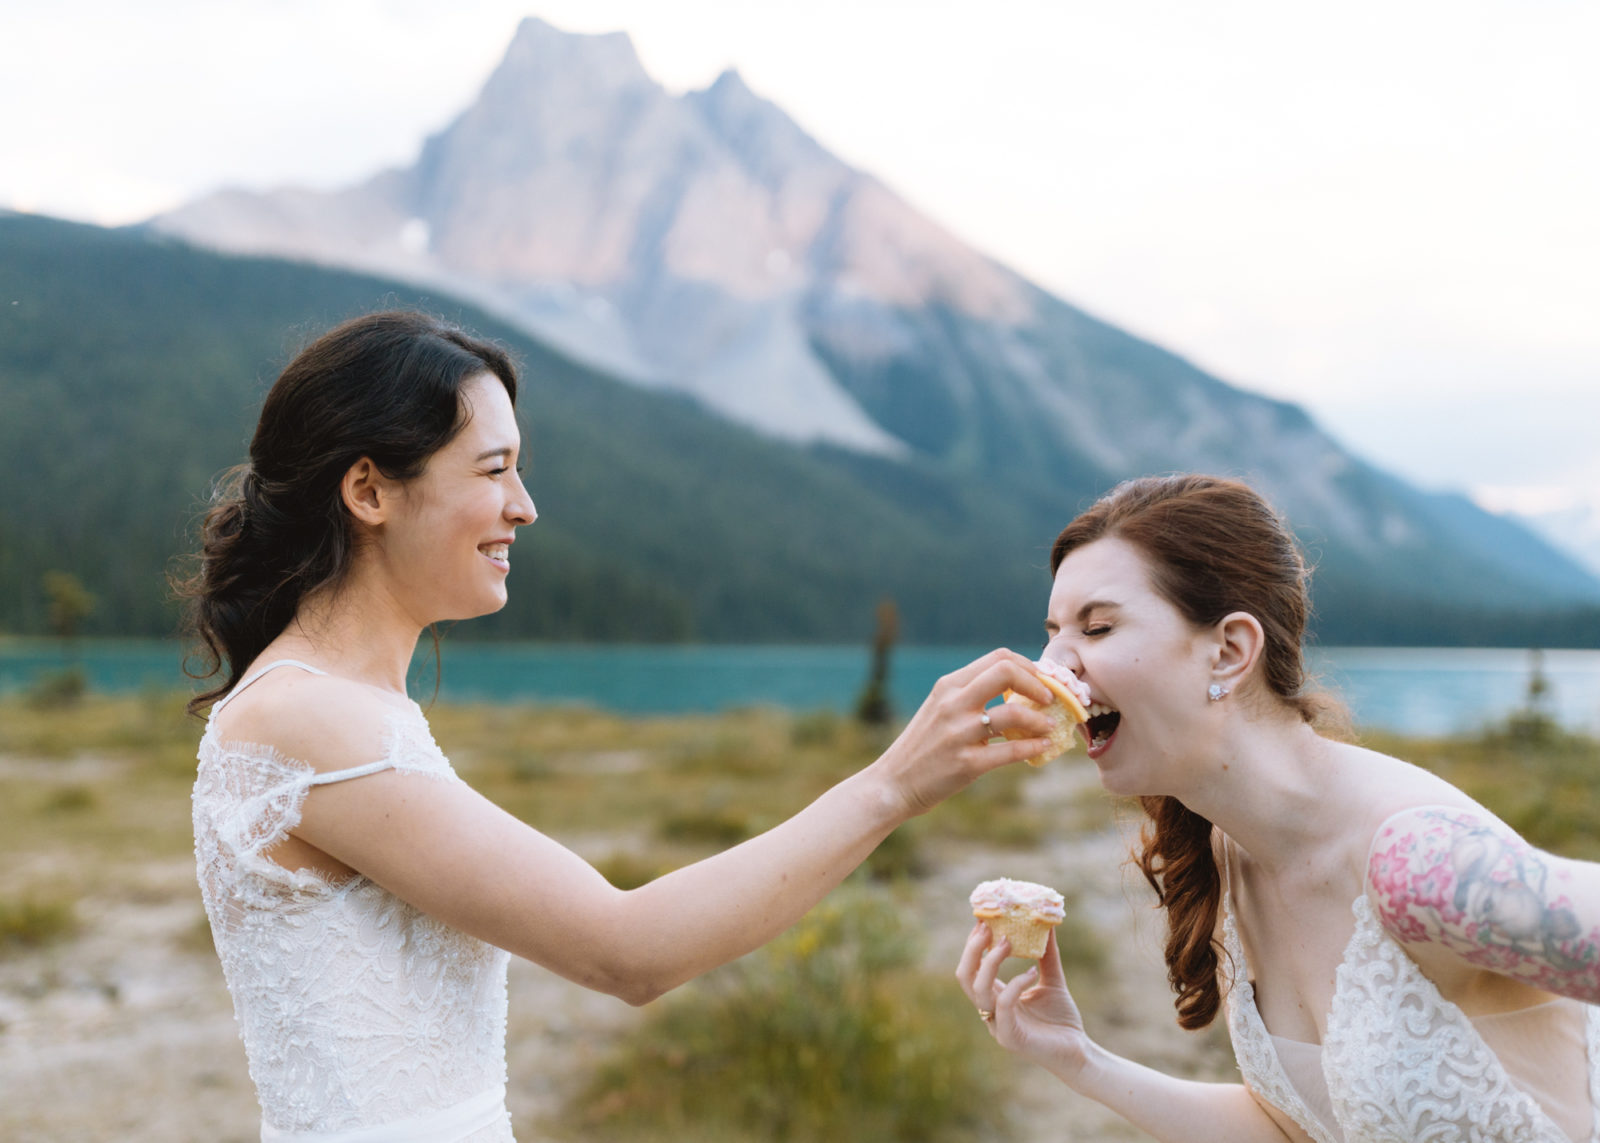 Newly weds cake smash with cupcakes for their Elopement in Yoho National Park